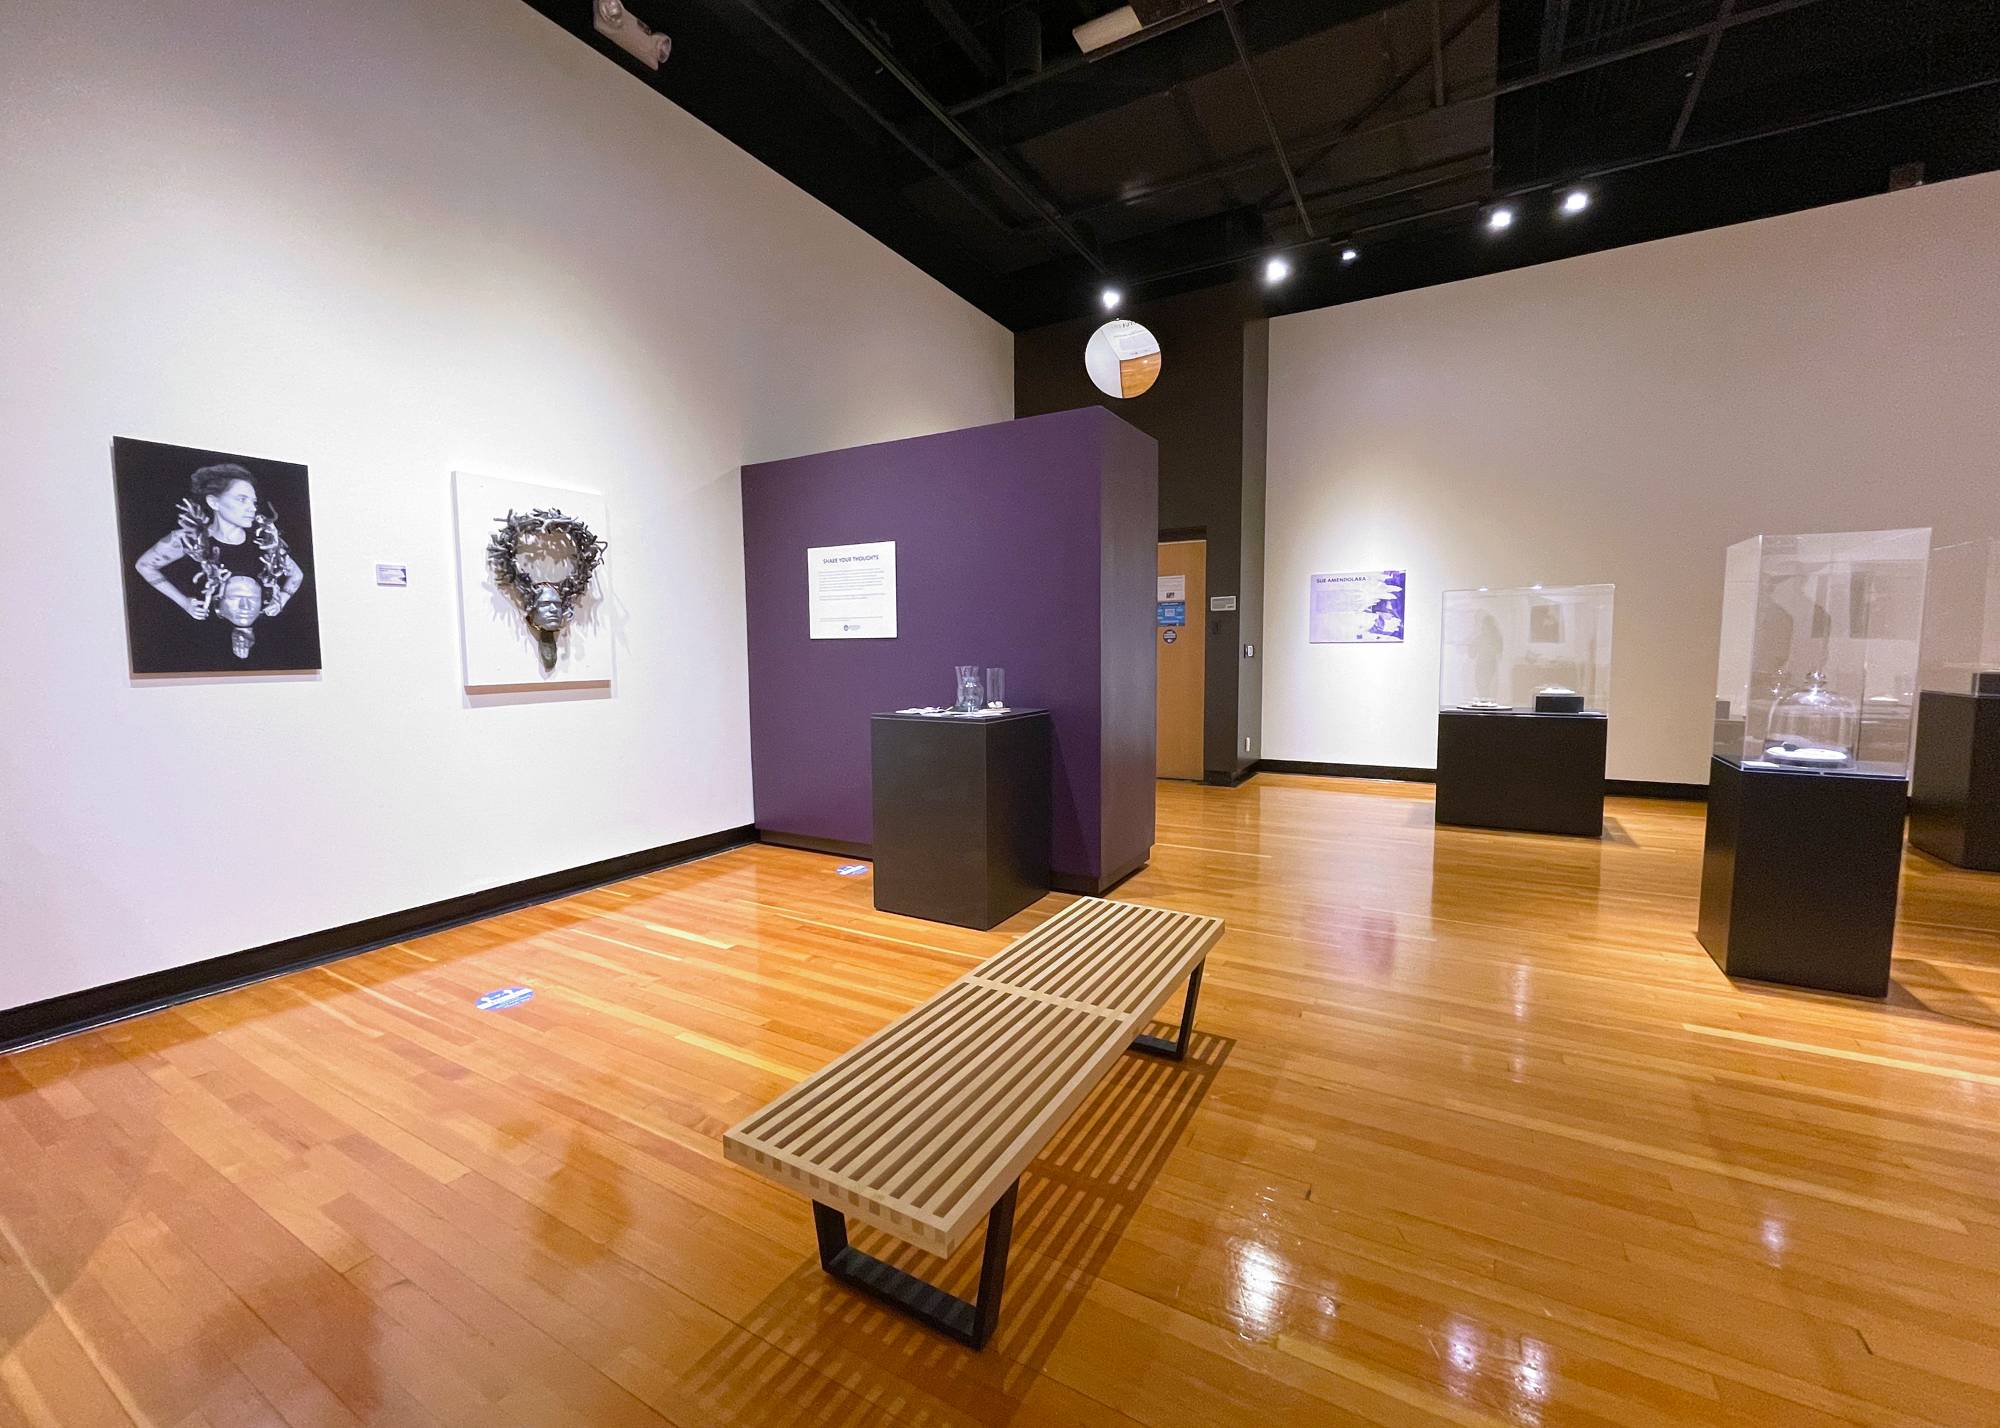 View of the exhibition Sorrow/Fullness in the GVSU Art Gallery